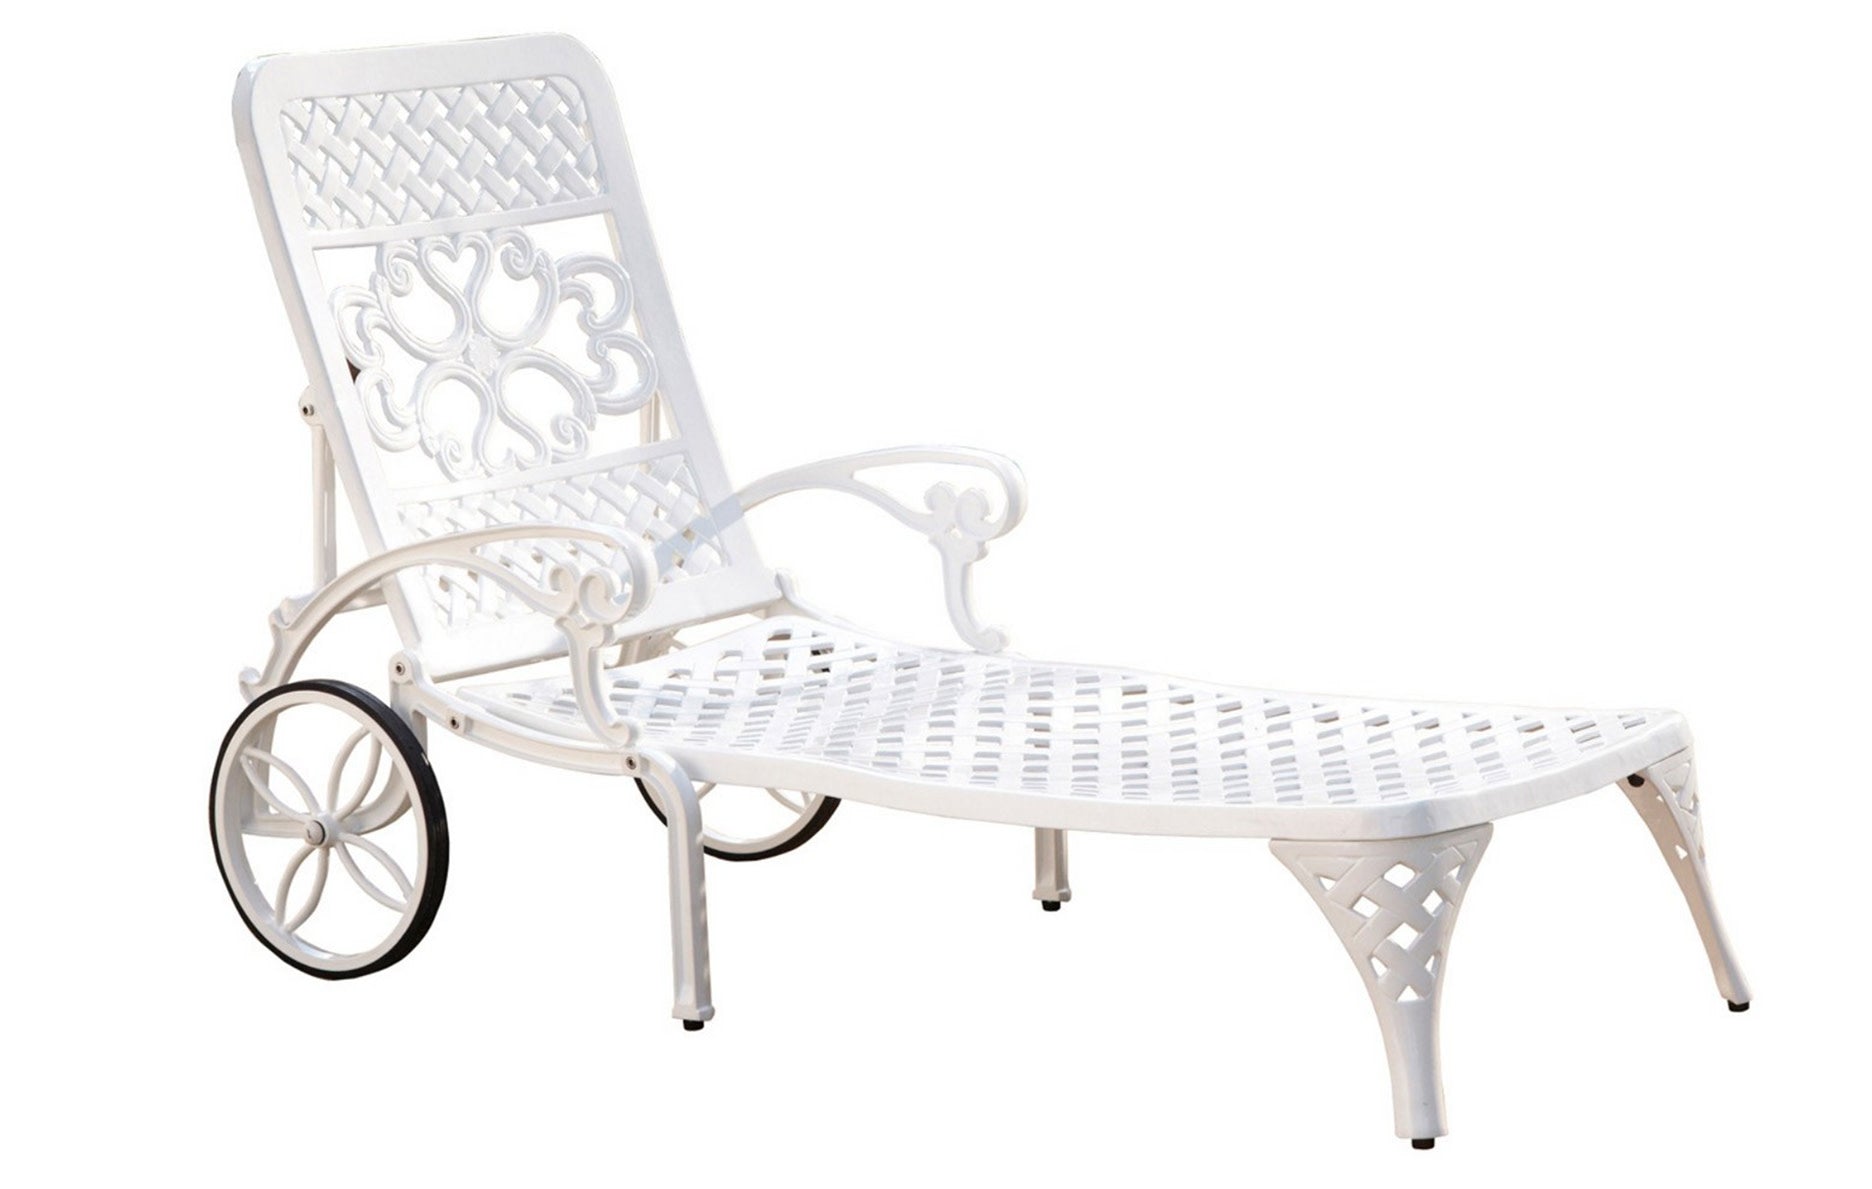 Sanibel Outdoor Chaise Lounge by Homestyles - White - Aluminum - 6652-83